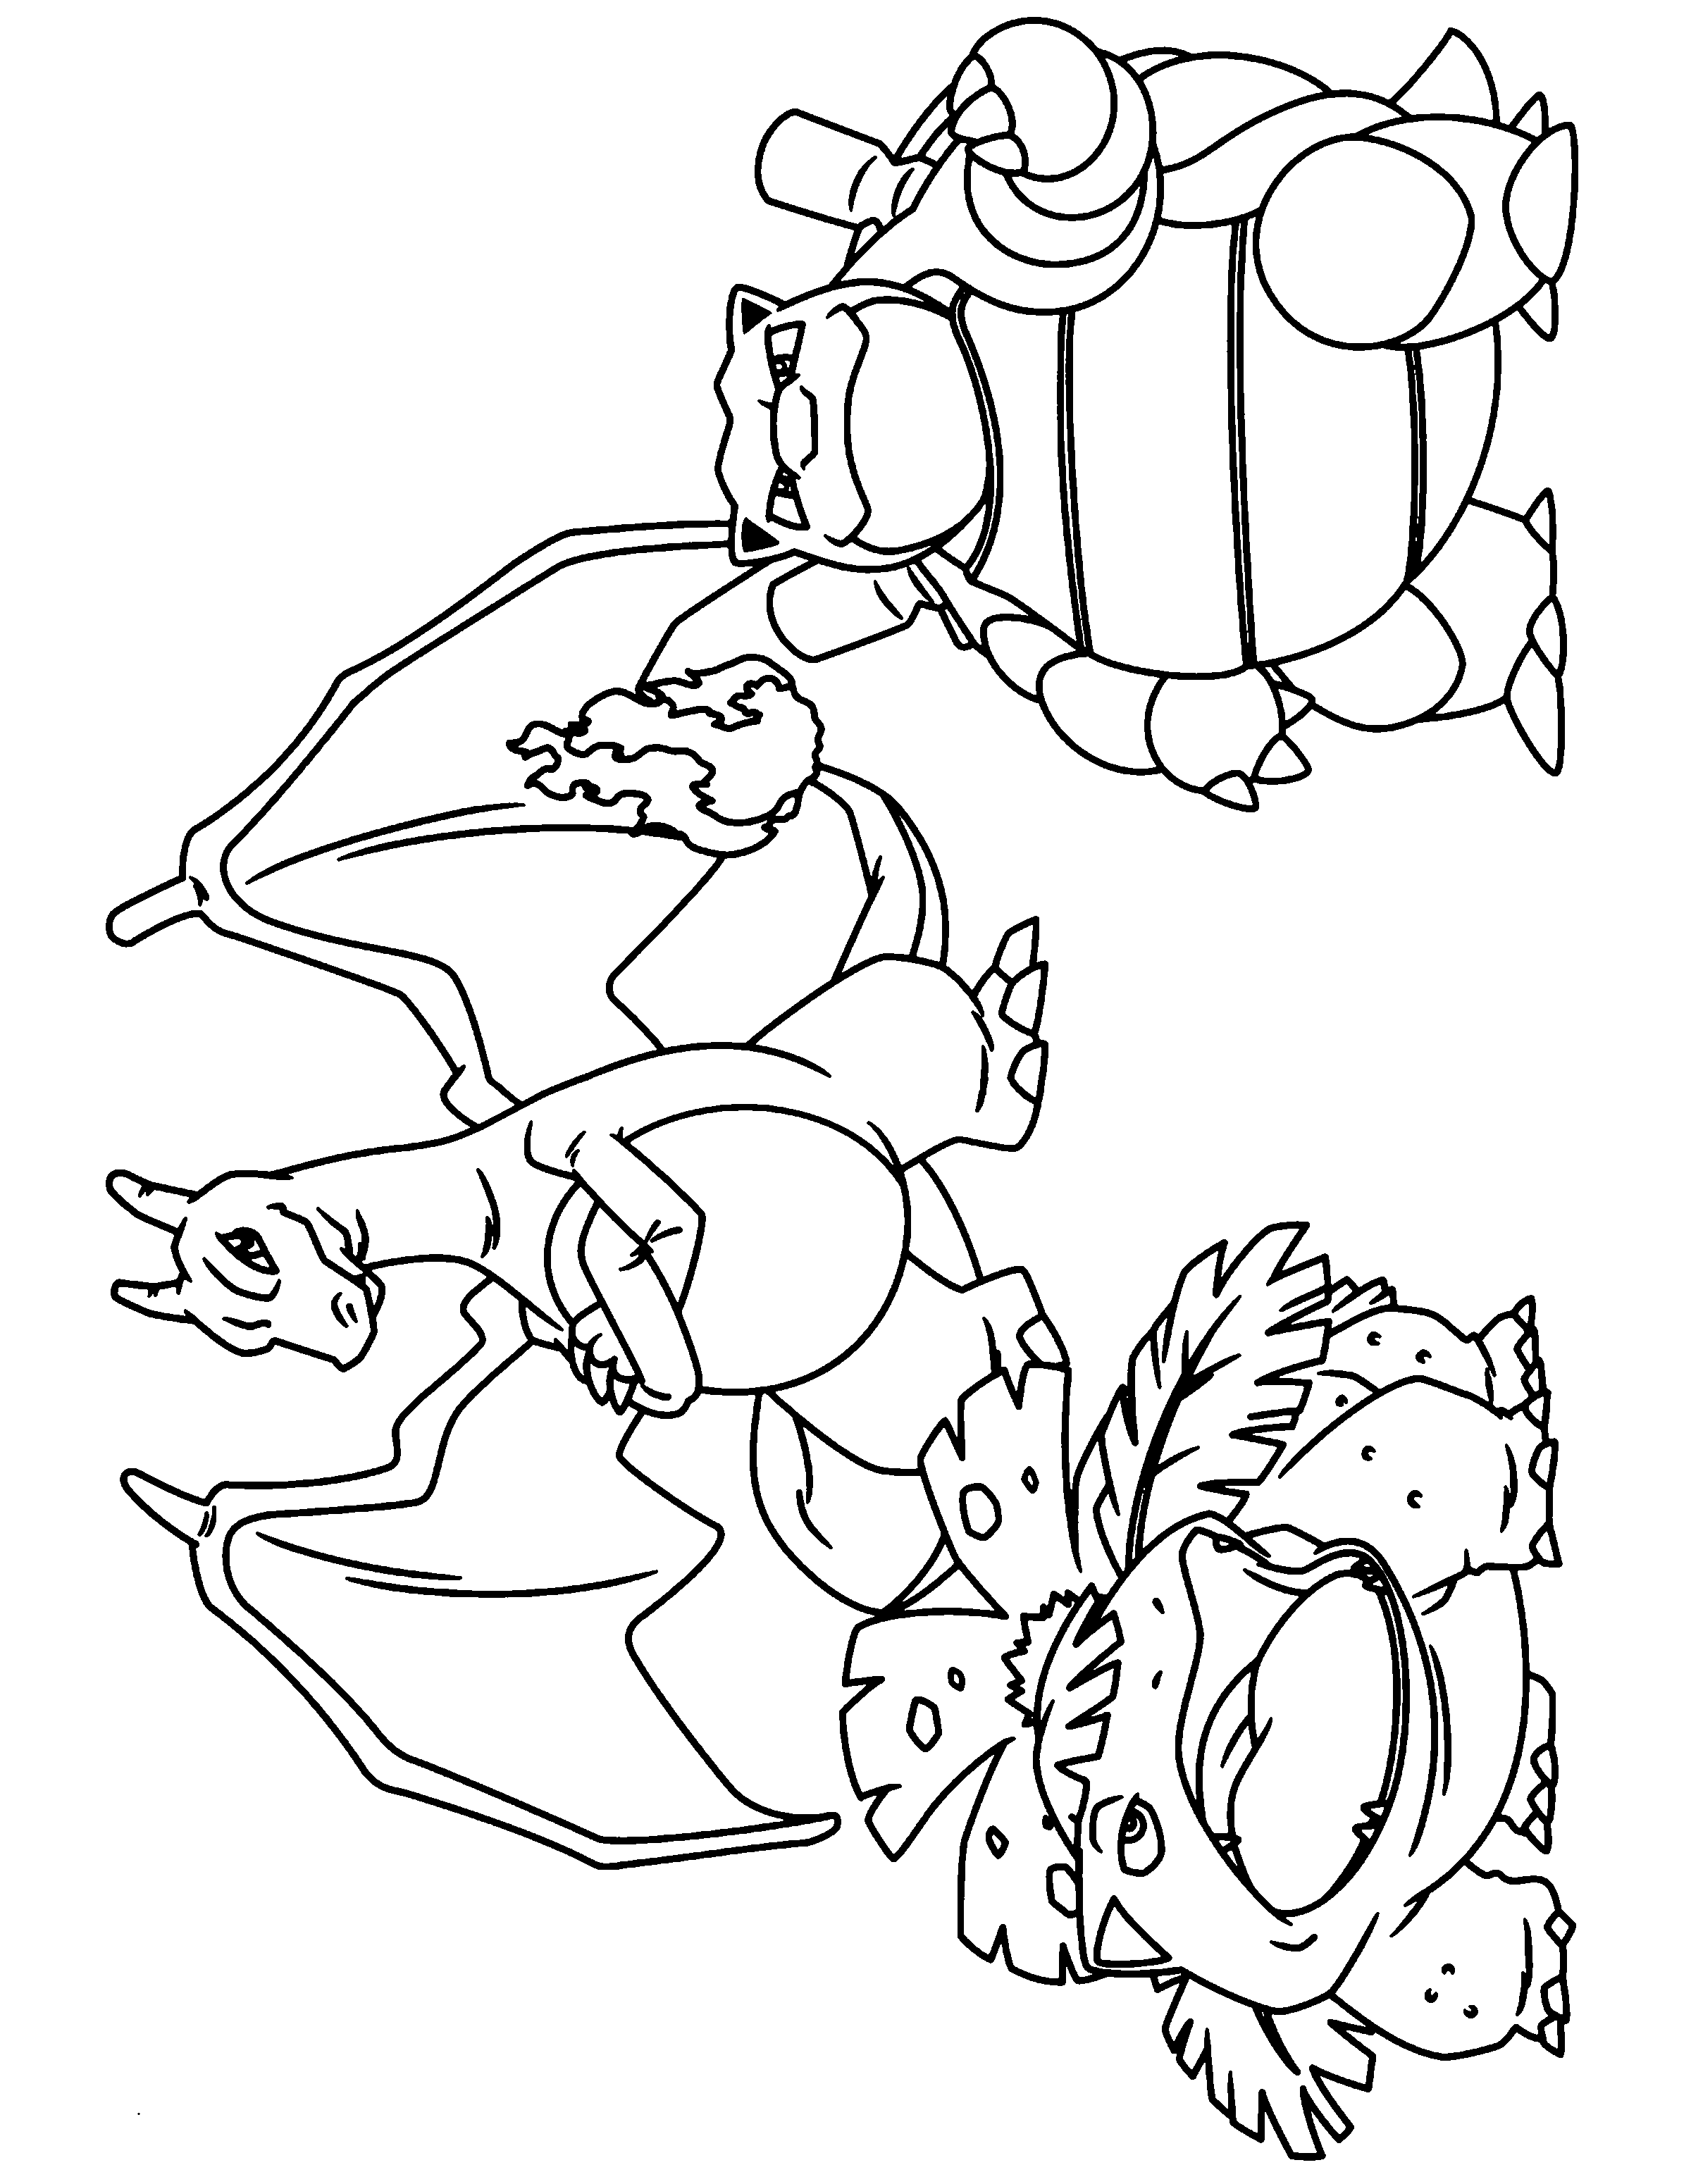 animated-coloring-pages-pokemon-image-0982